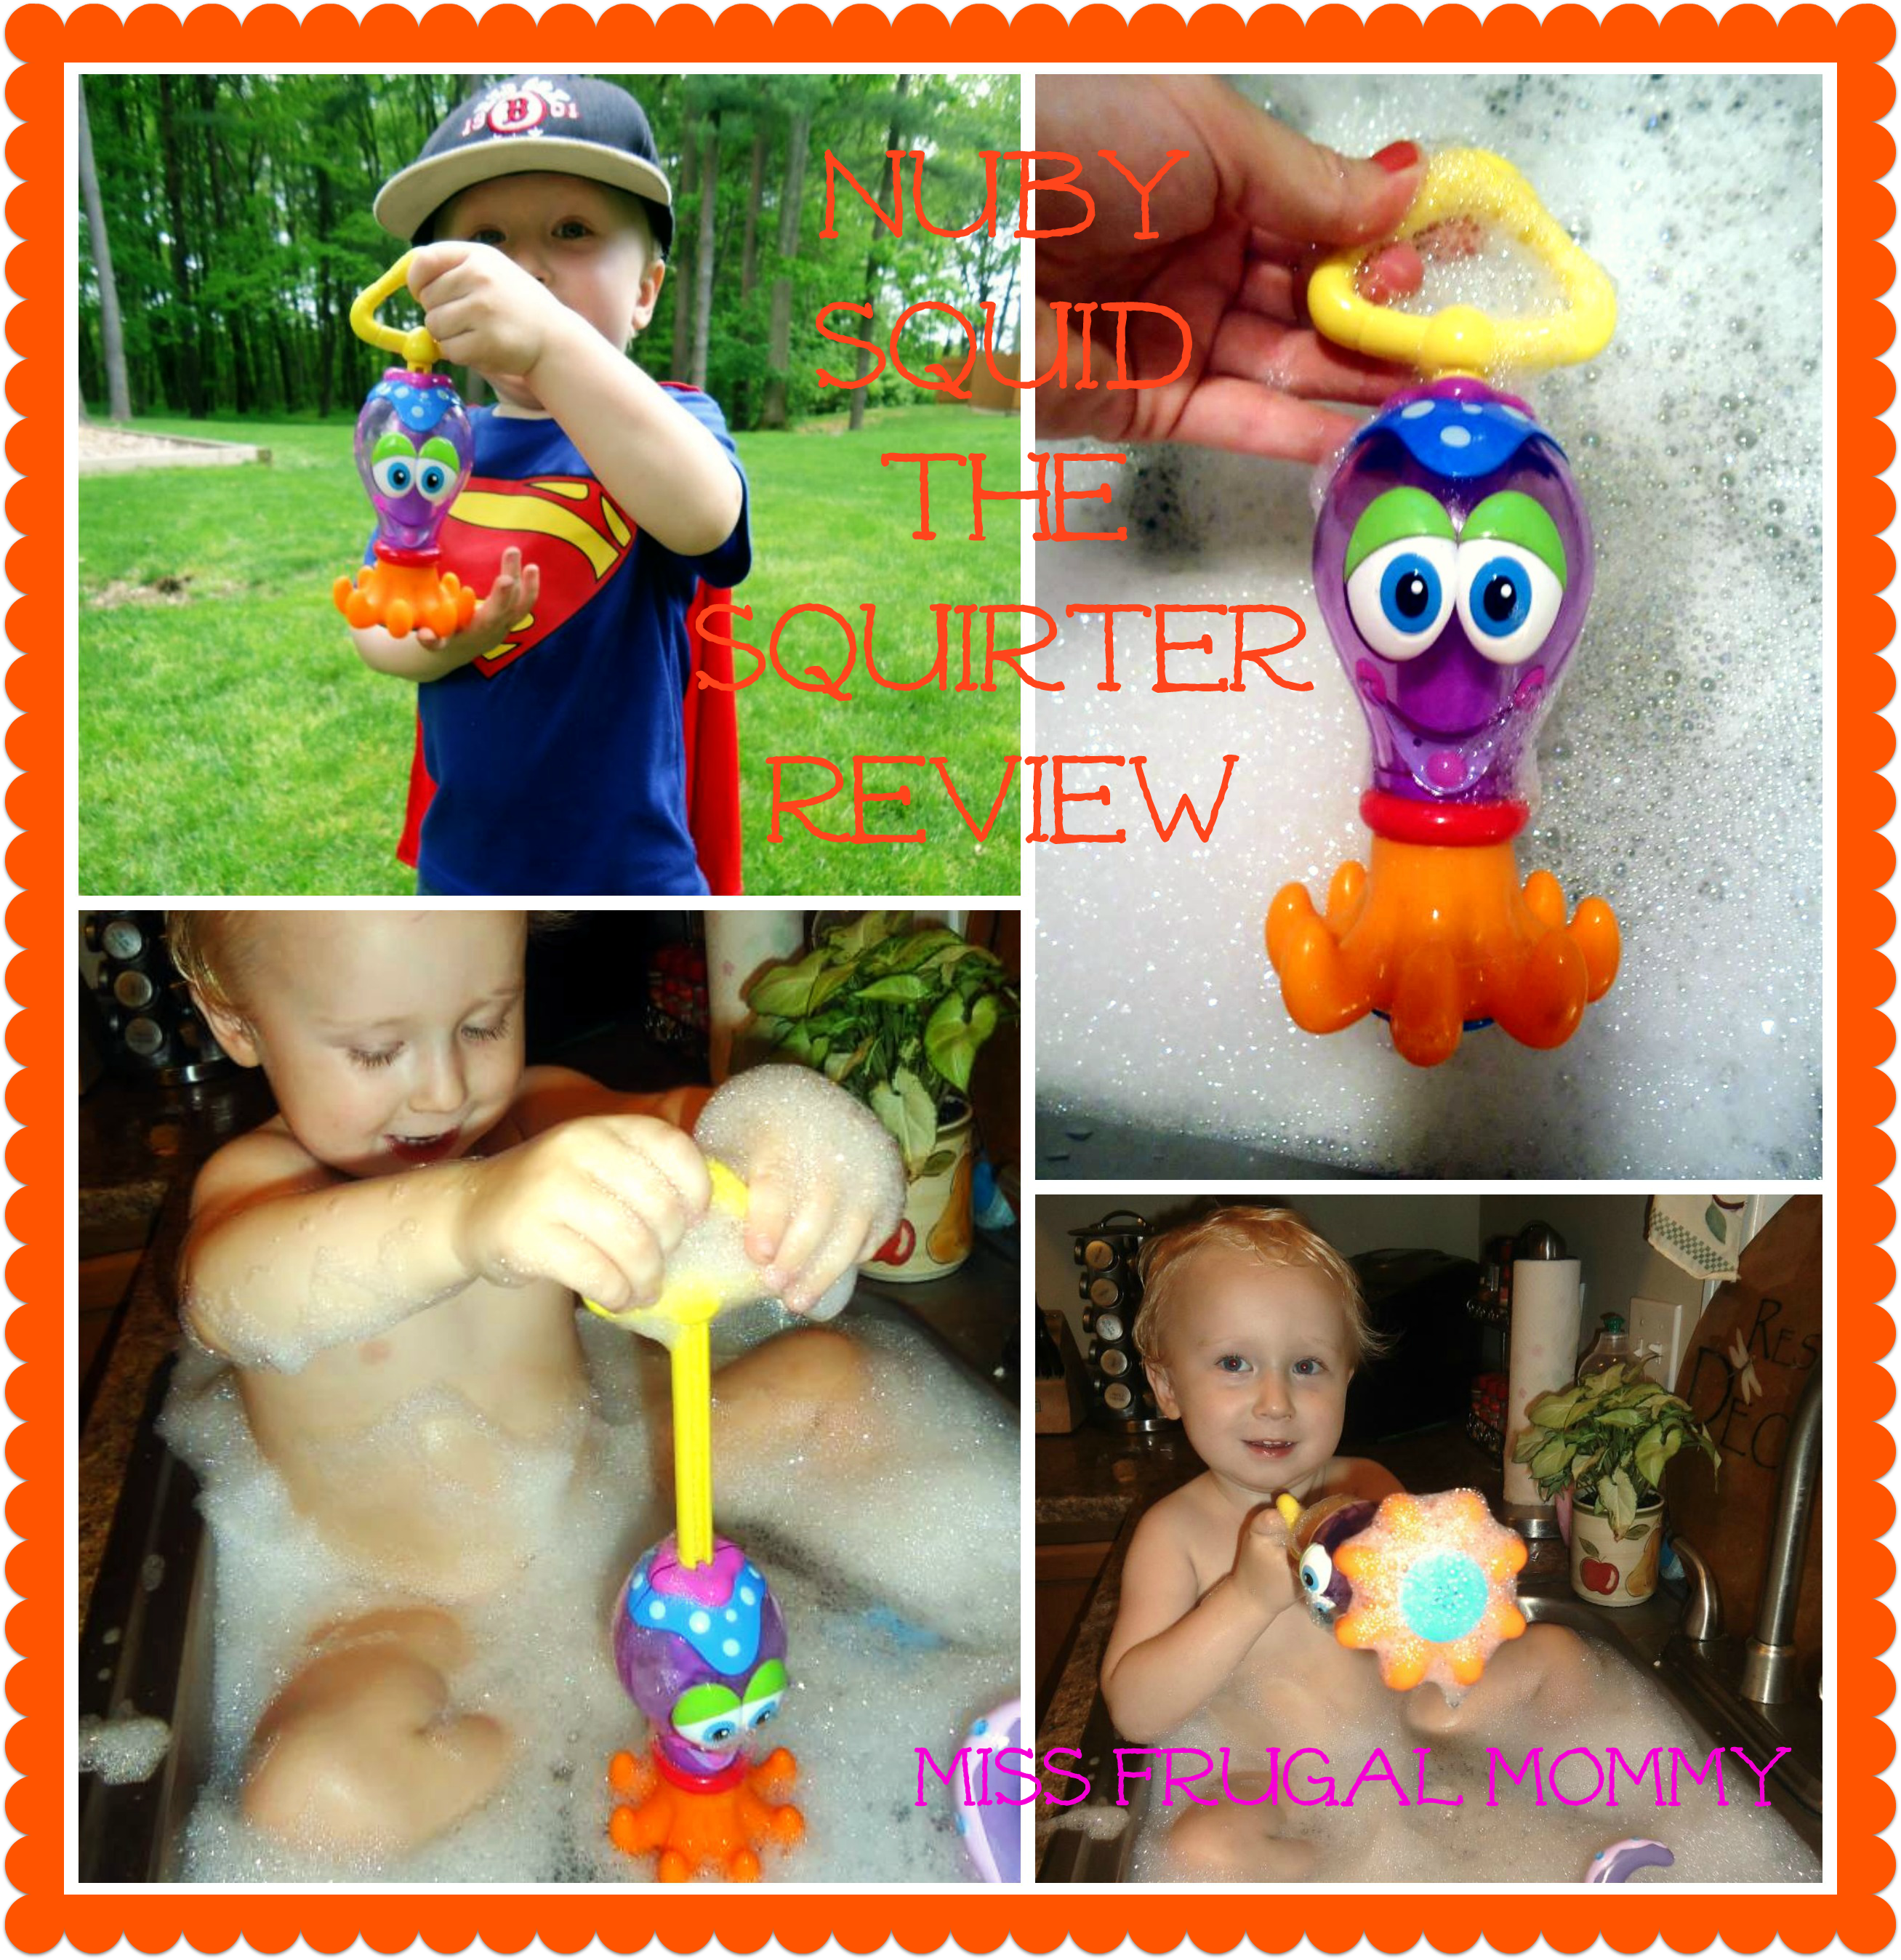 http://missfrugalmommy.com/wp-content/uploads/2013/07/nuby-collage-3.png